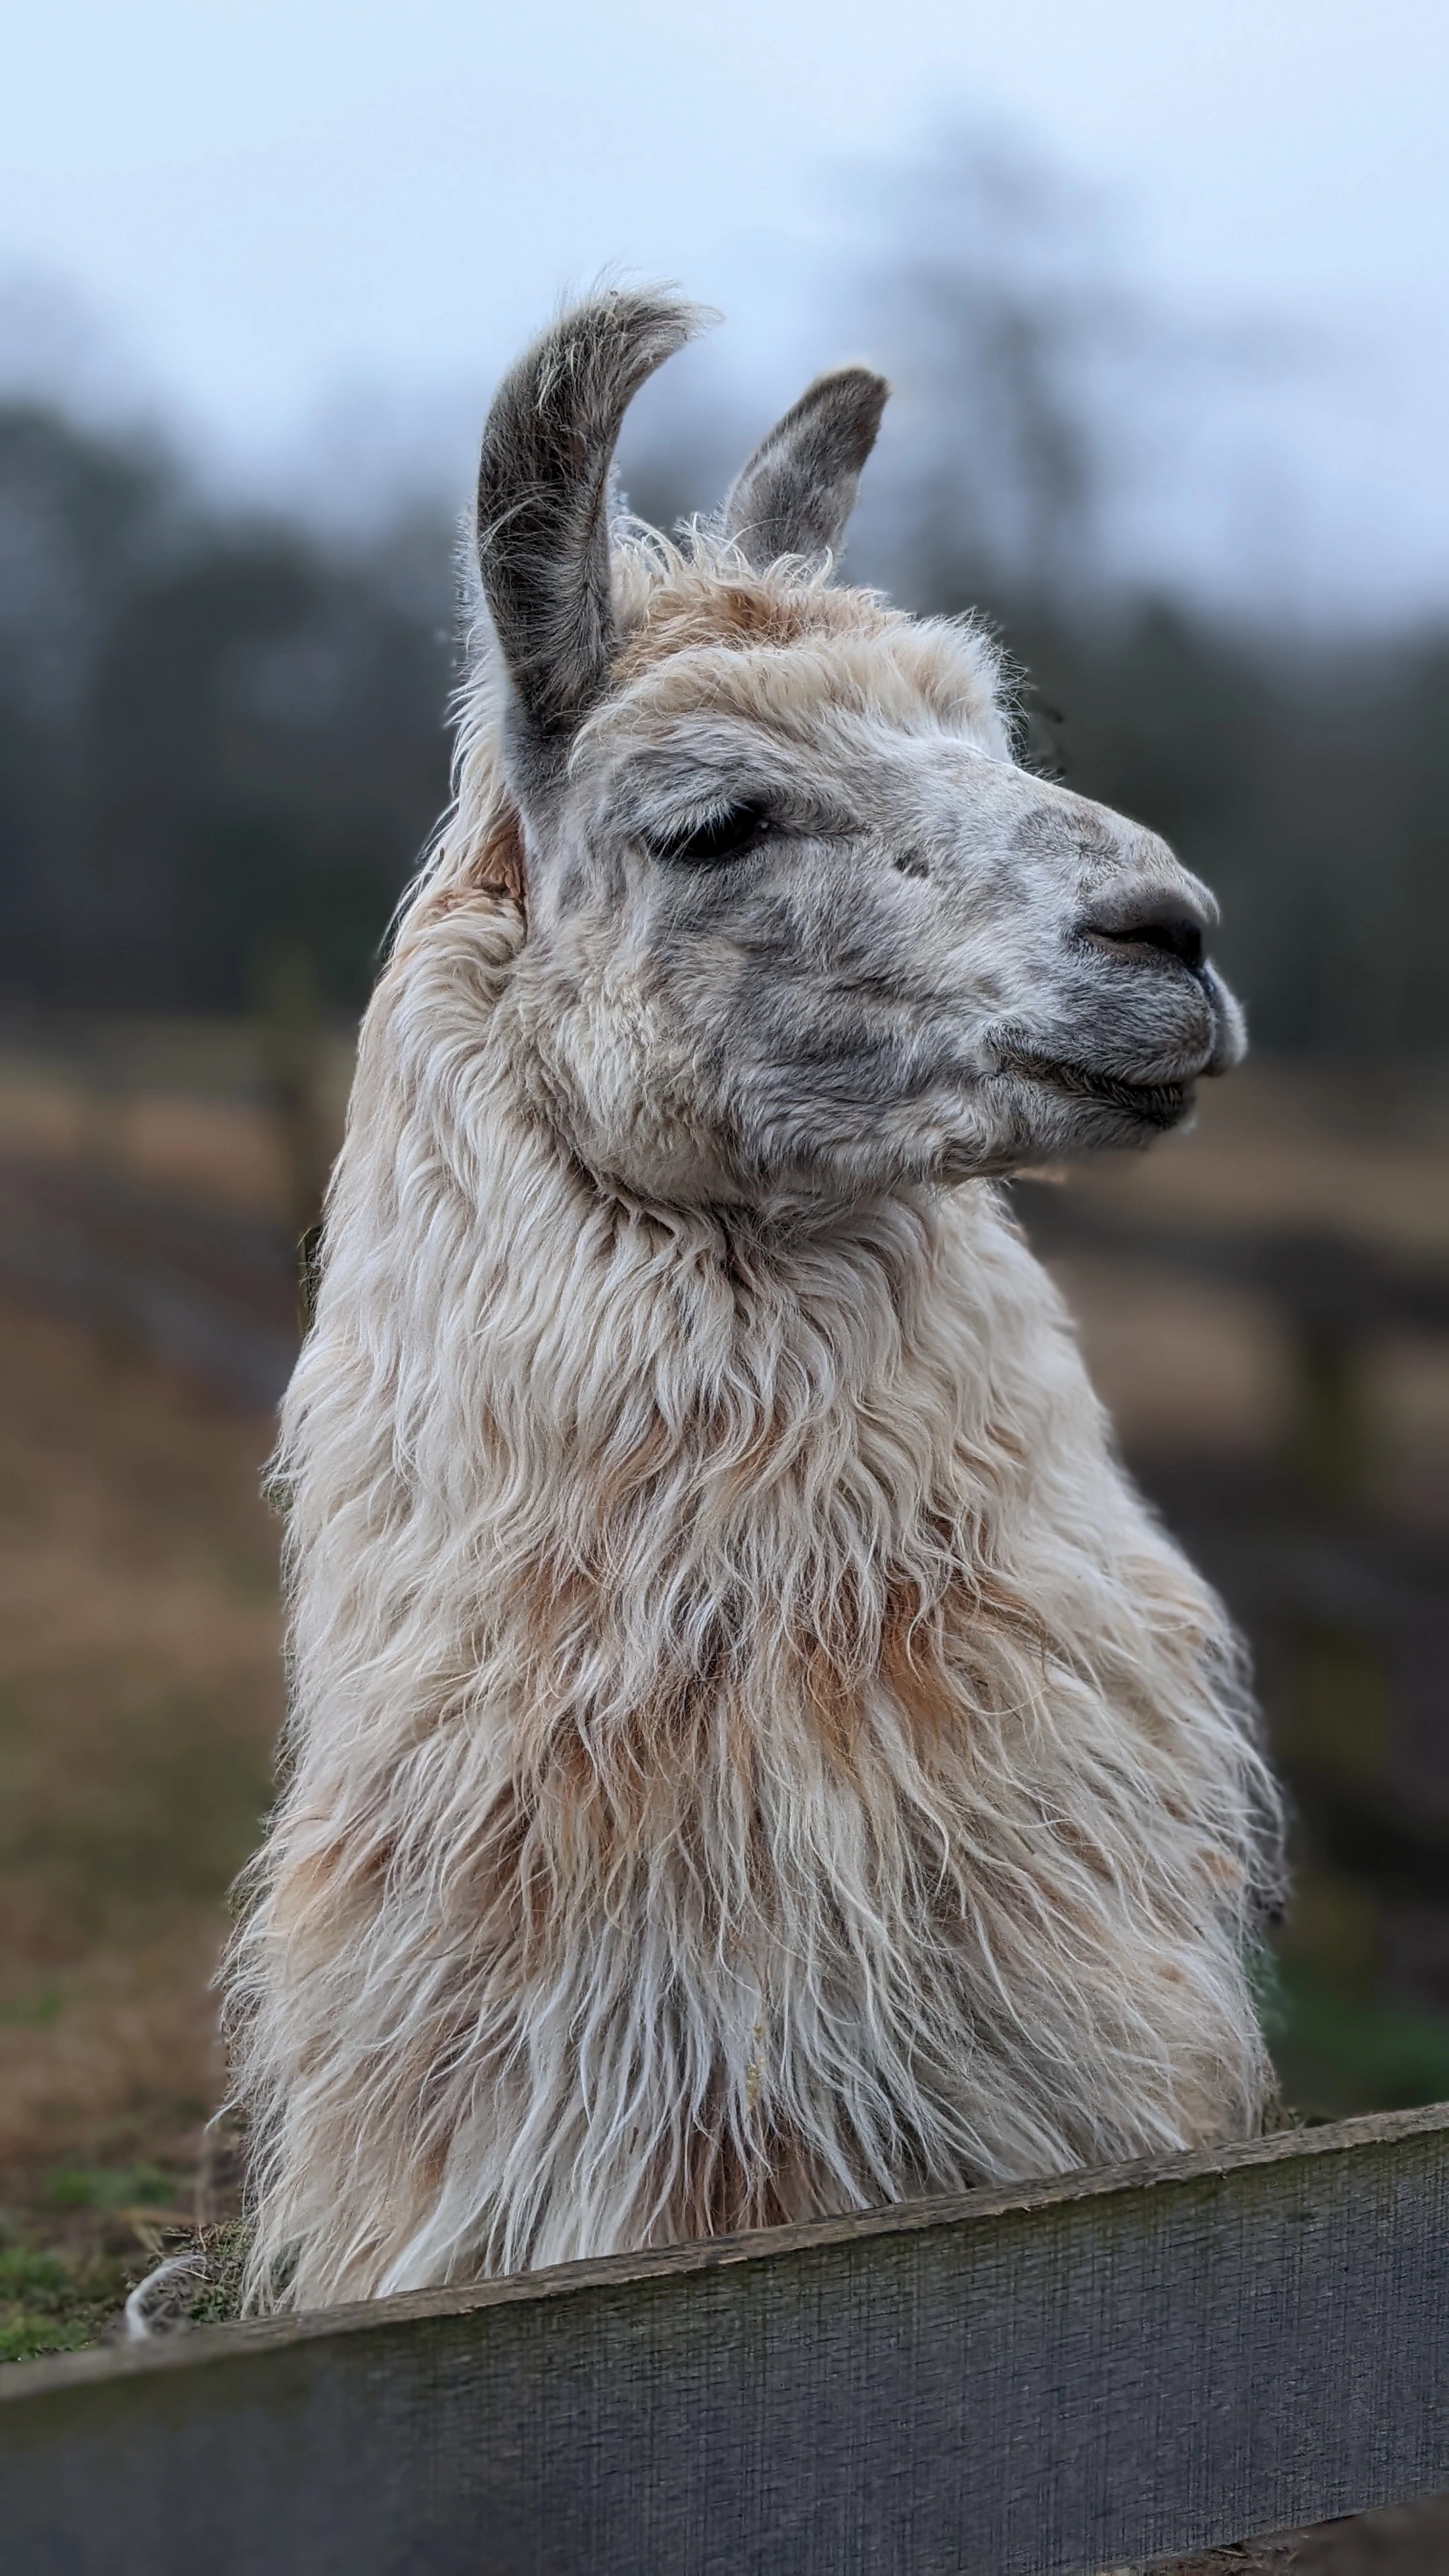 A portrait image of a llama named Appy Hour